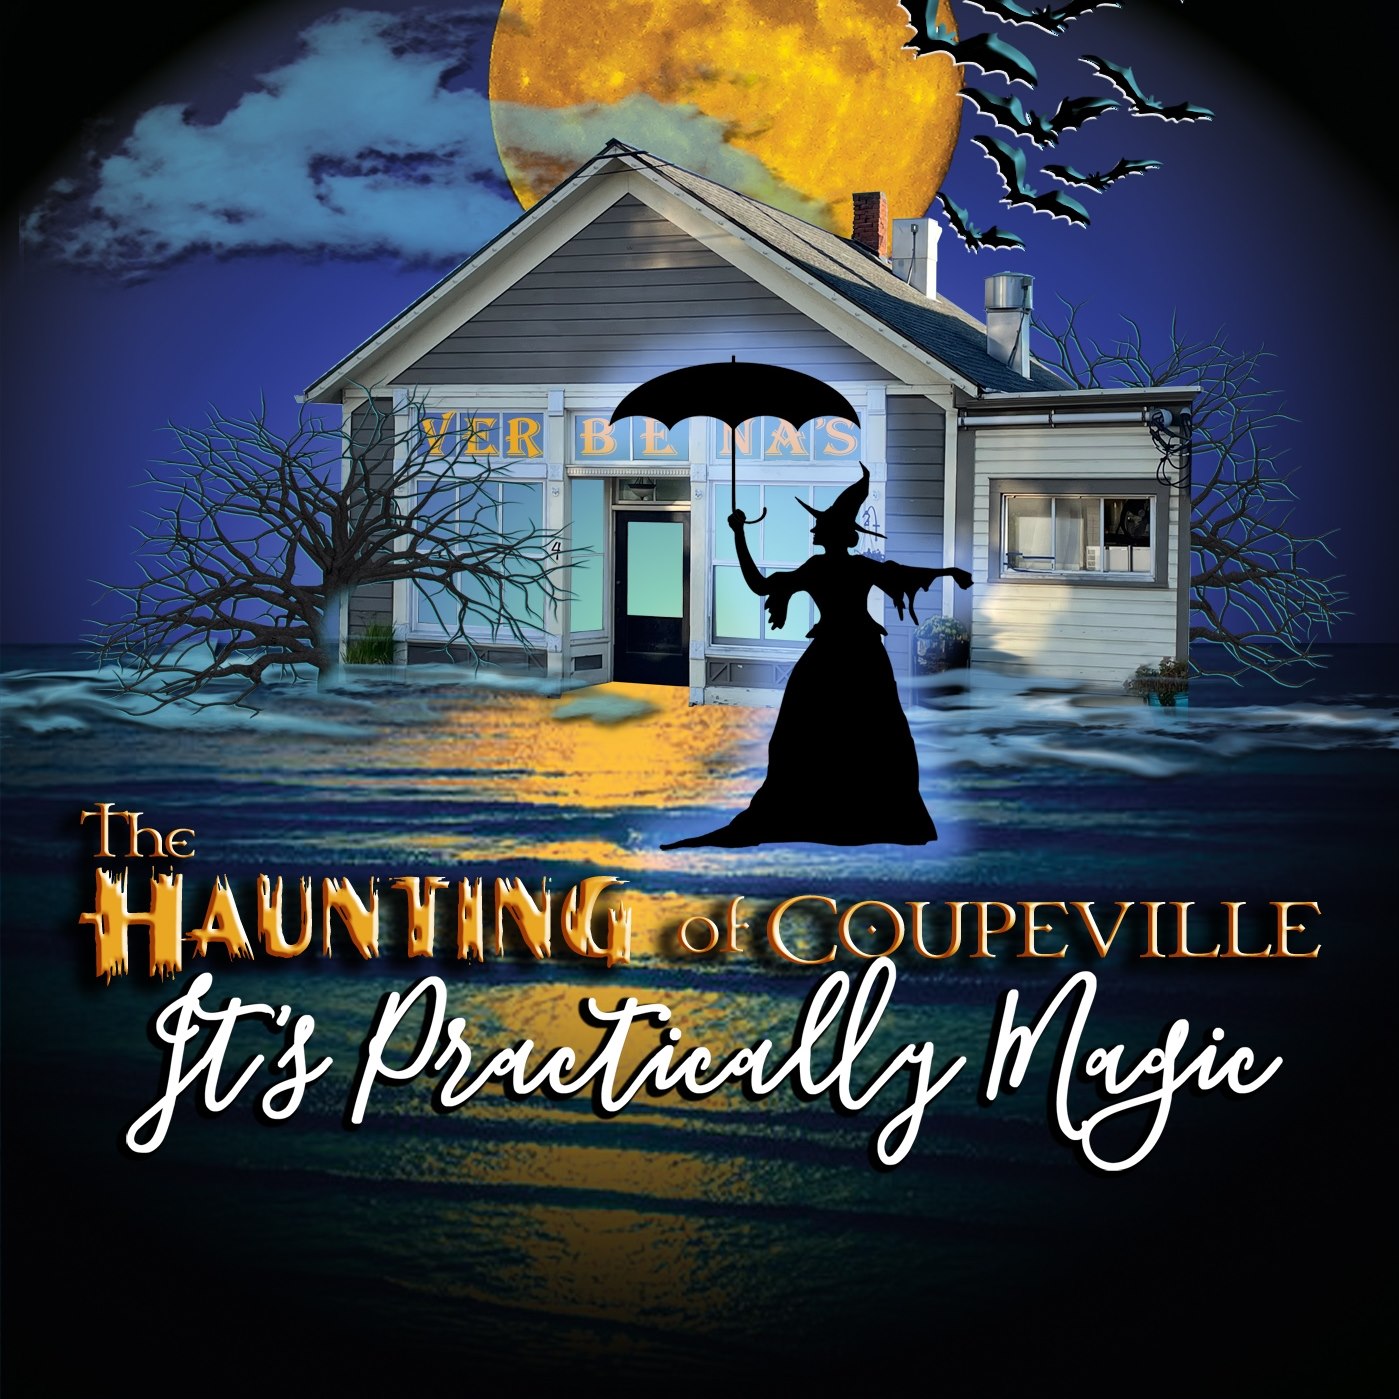 The Haunting of Coupeville